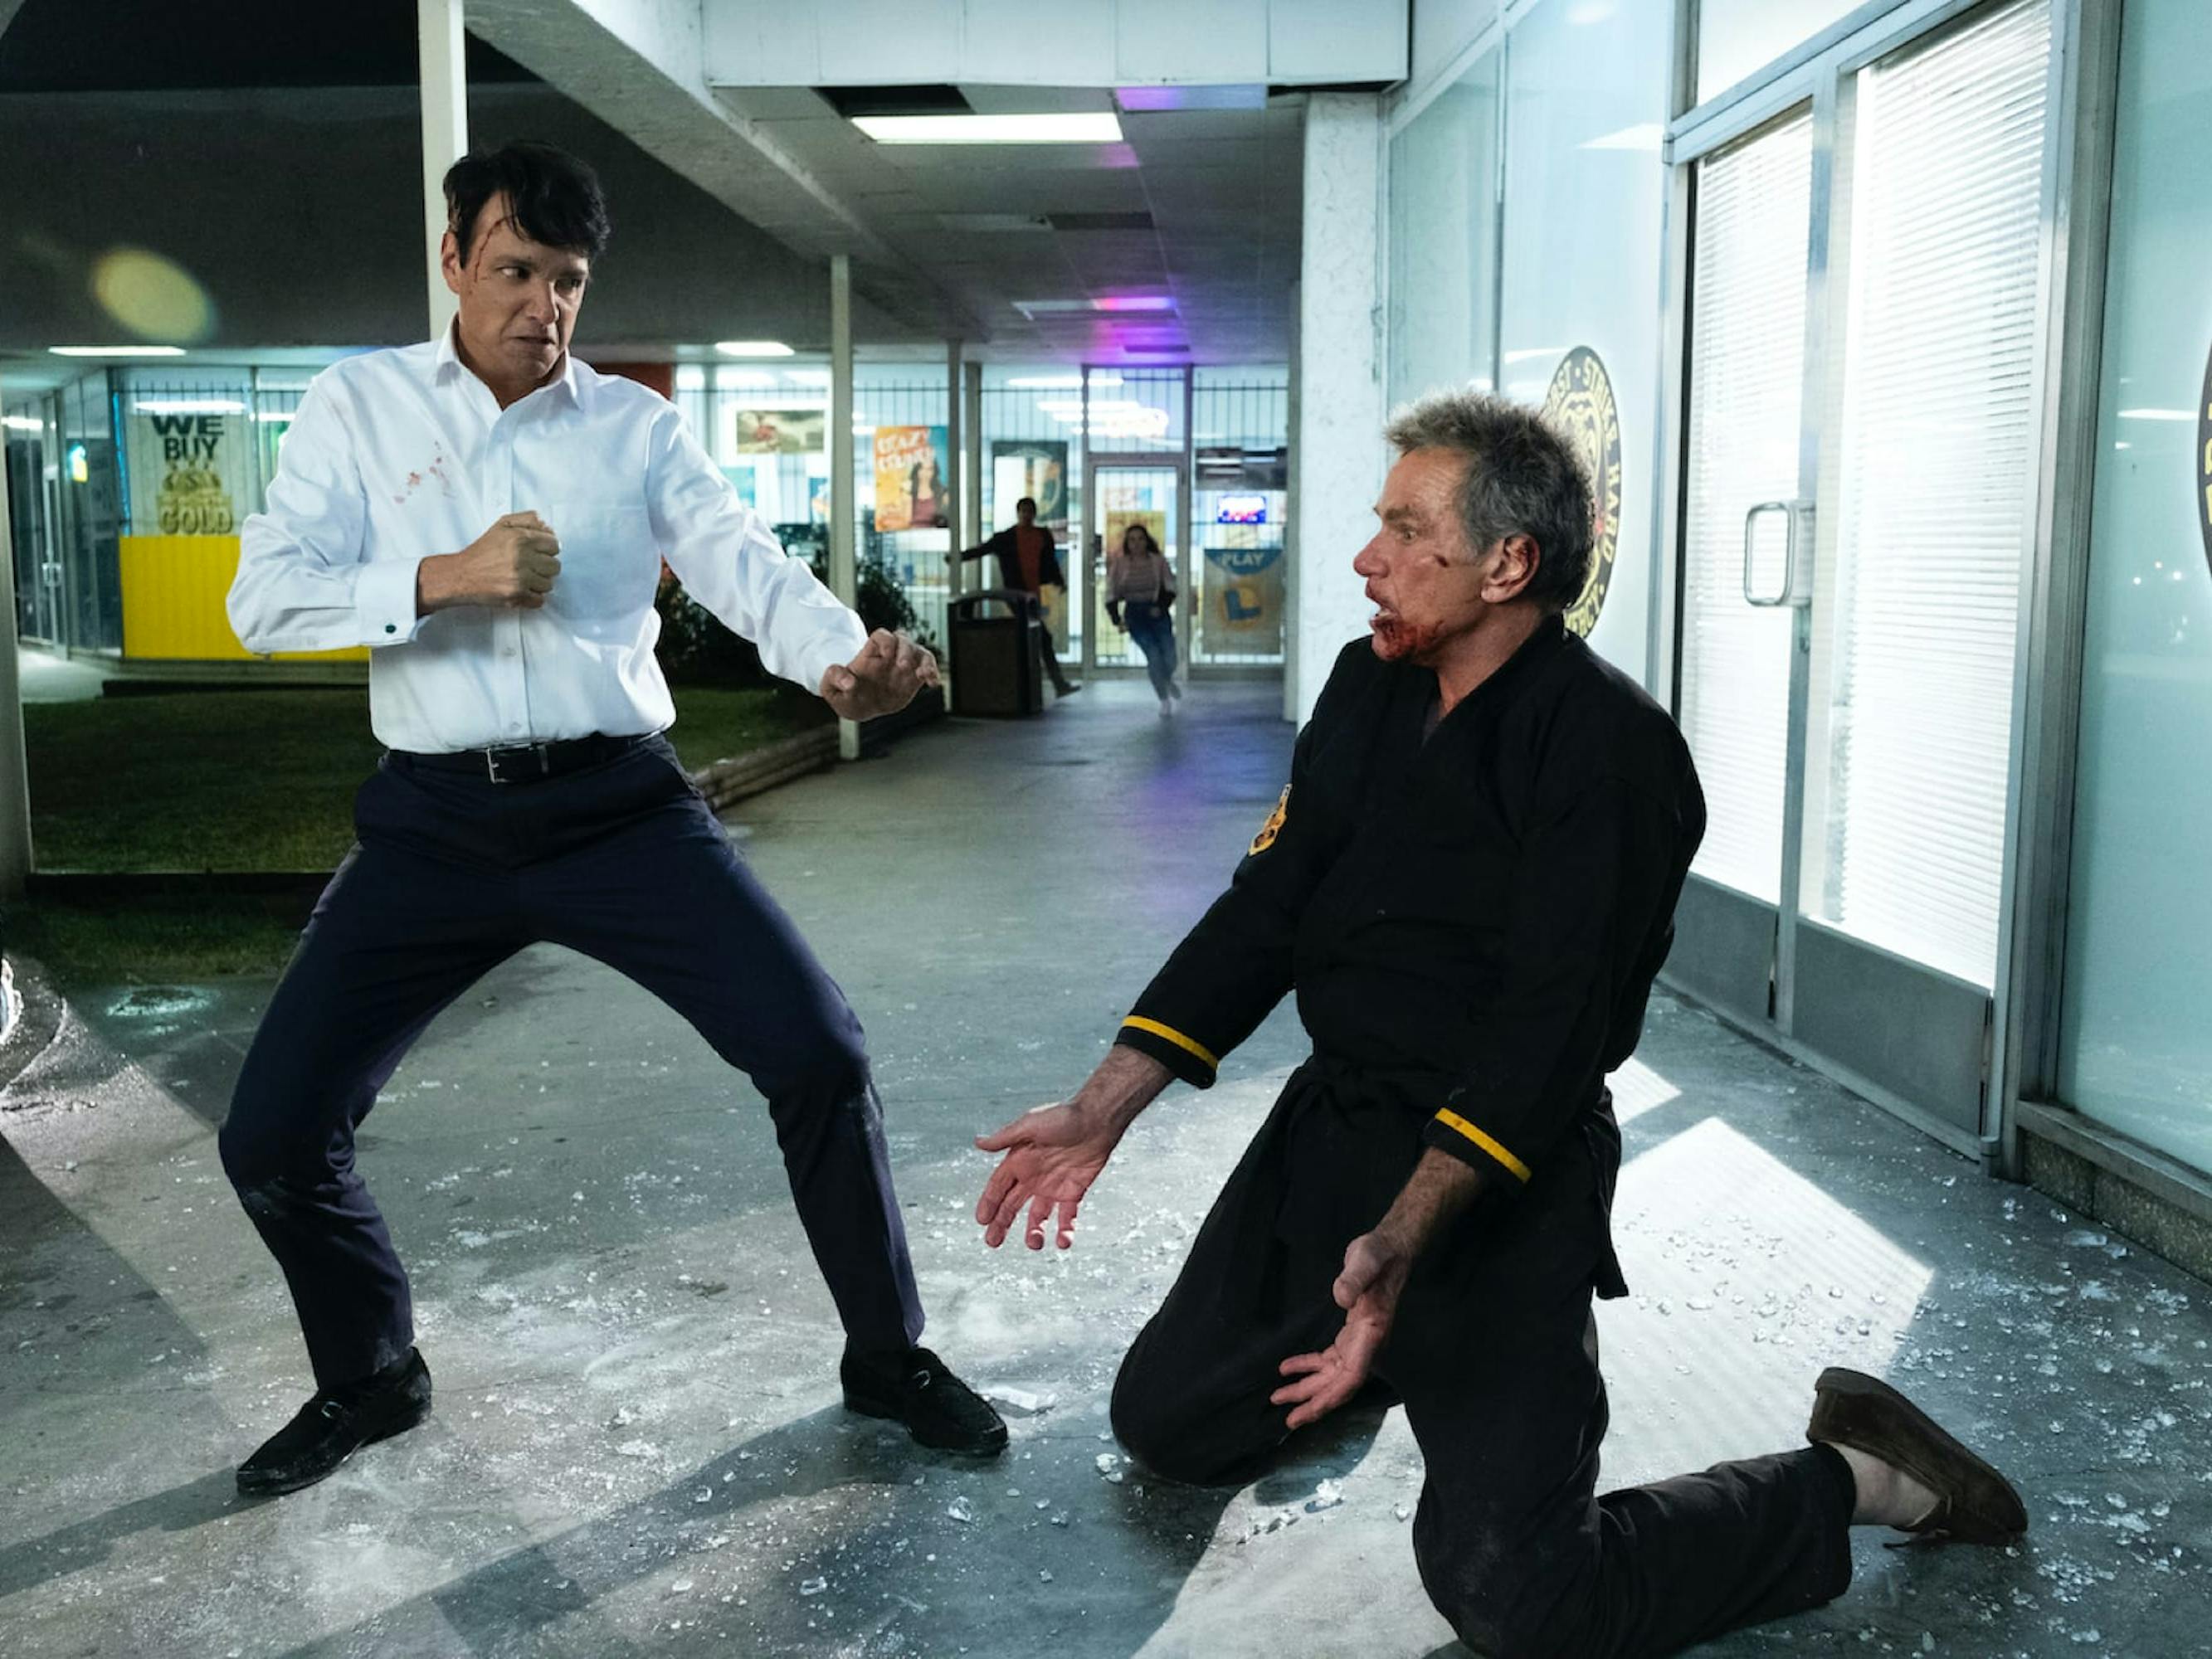 Daniel LaRusso (Ralph Macchio) and John Kreese (Martin Kove) stand off in a fight in a car dealership. LaRusso wears a white shirt and stands ready to strike. Kreese kneels on the ground in a pile of glass, bloodied.